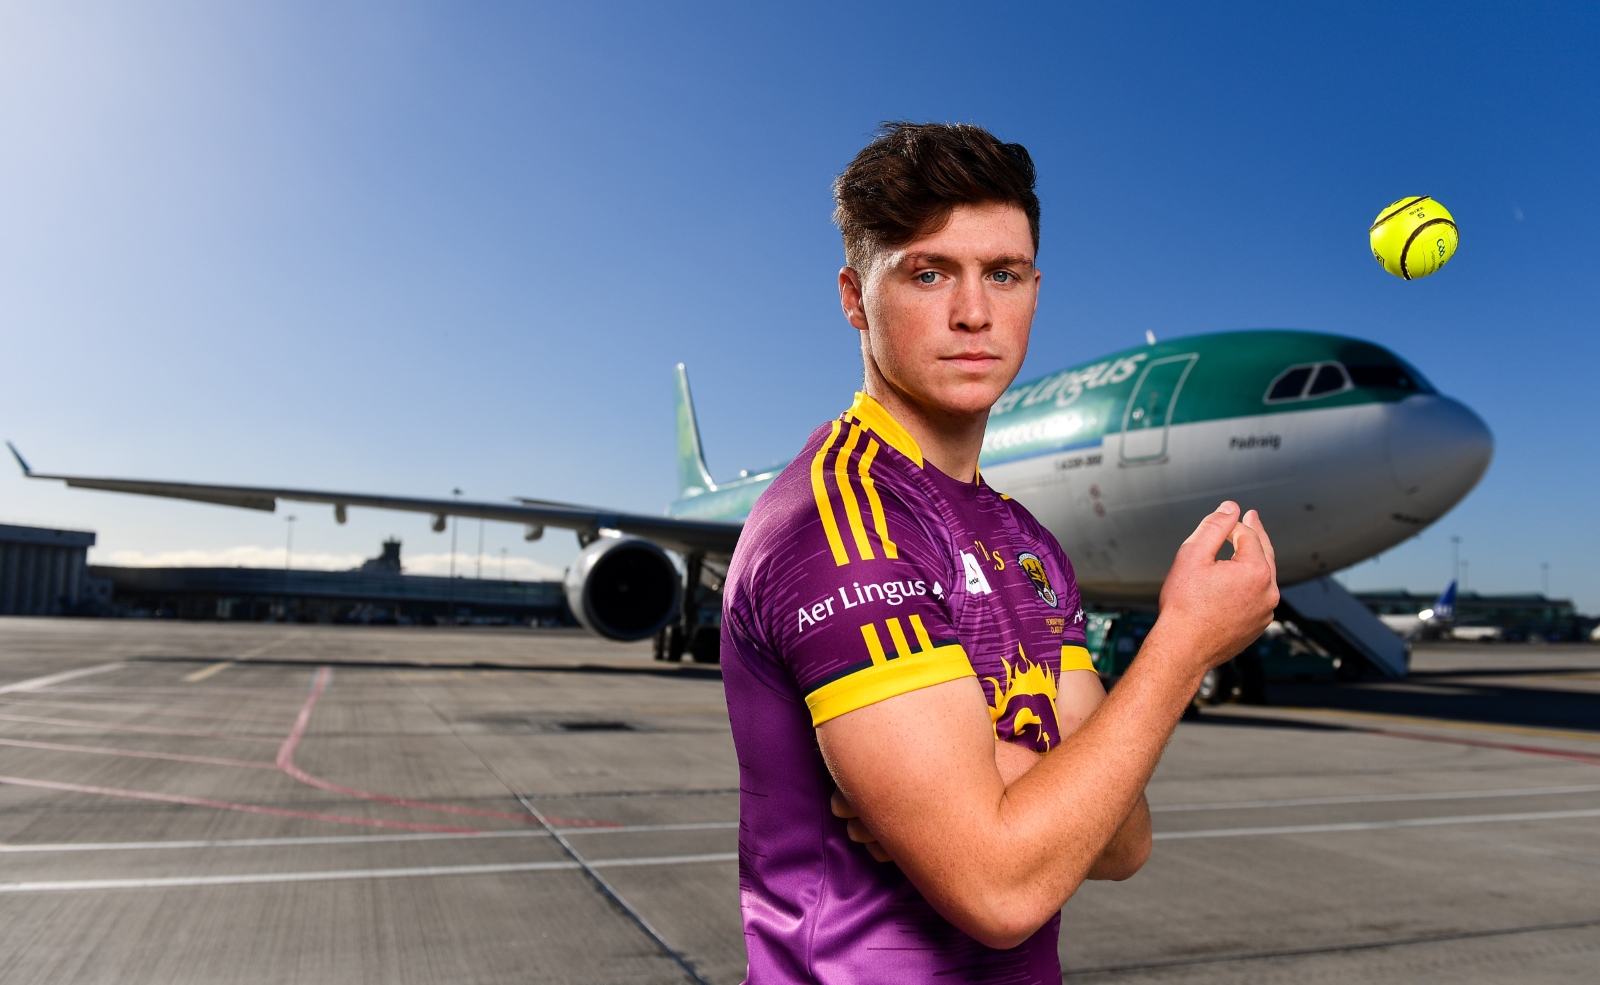 Jersey launch day at our Dublin Airport 